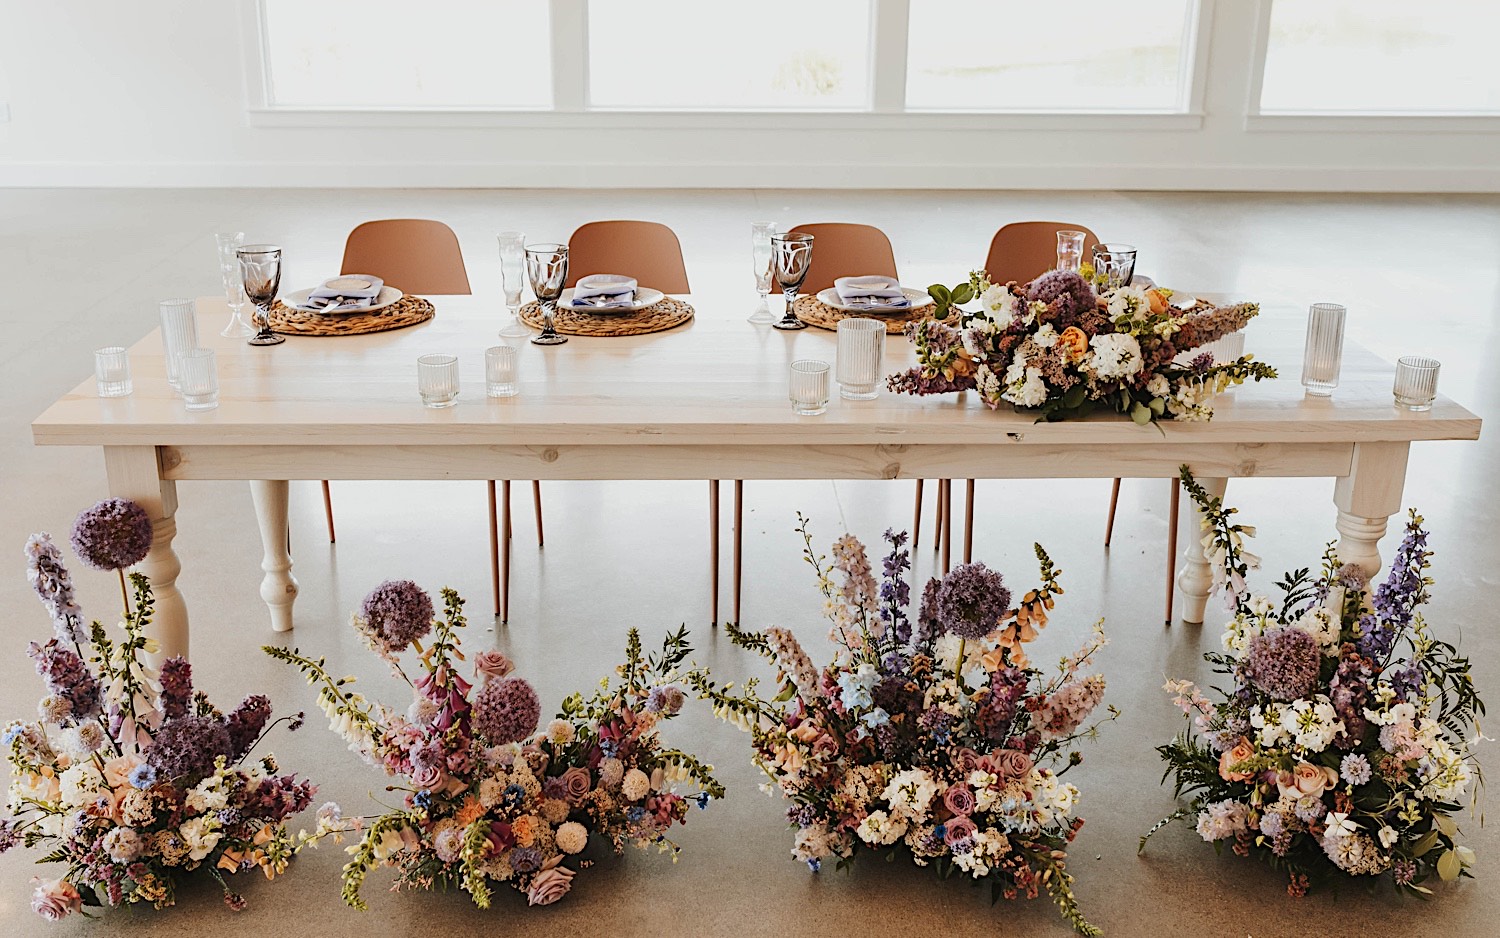 A table set up for a wedding with glassware, floral decorations line the floor in front of the table